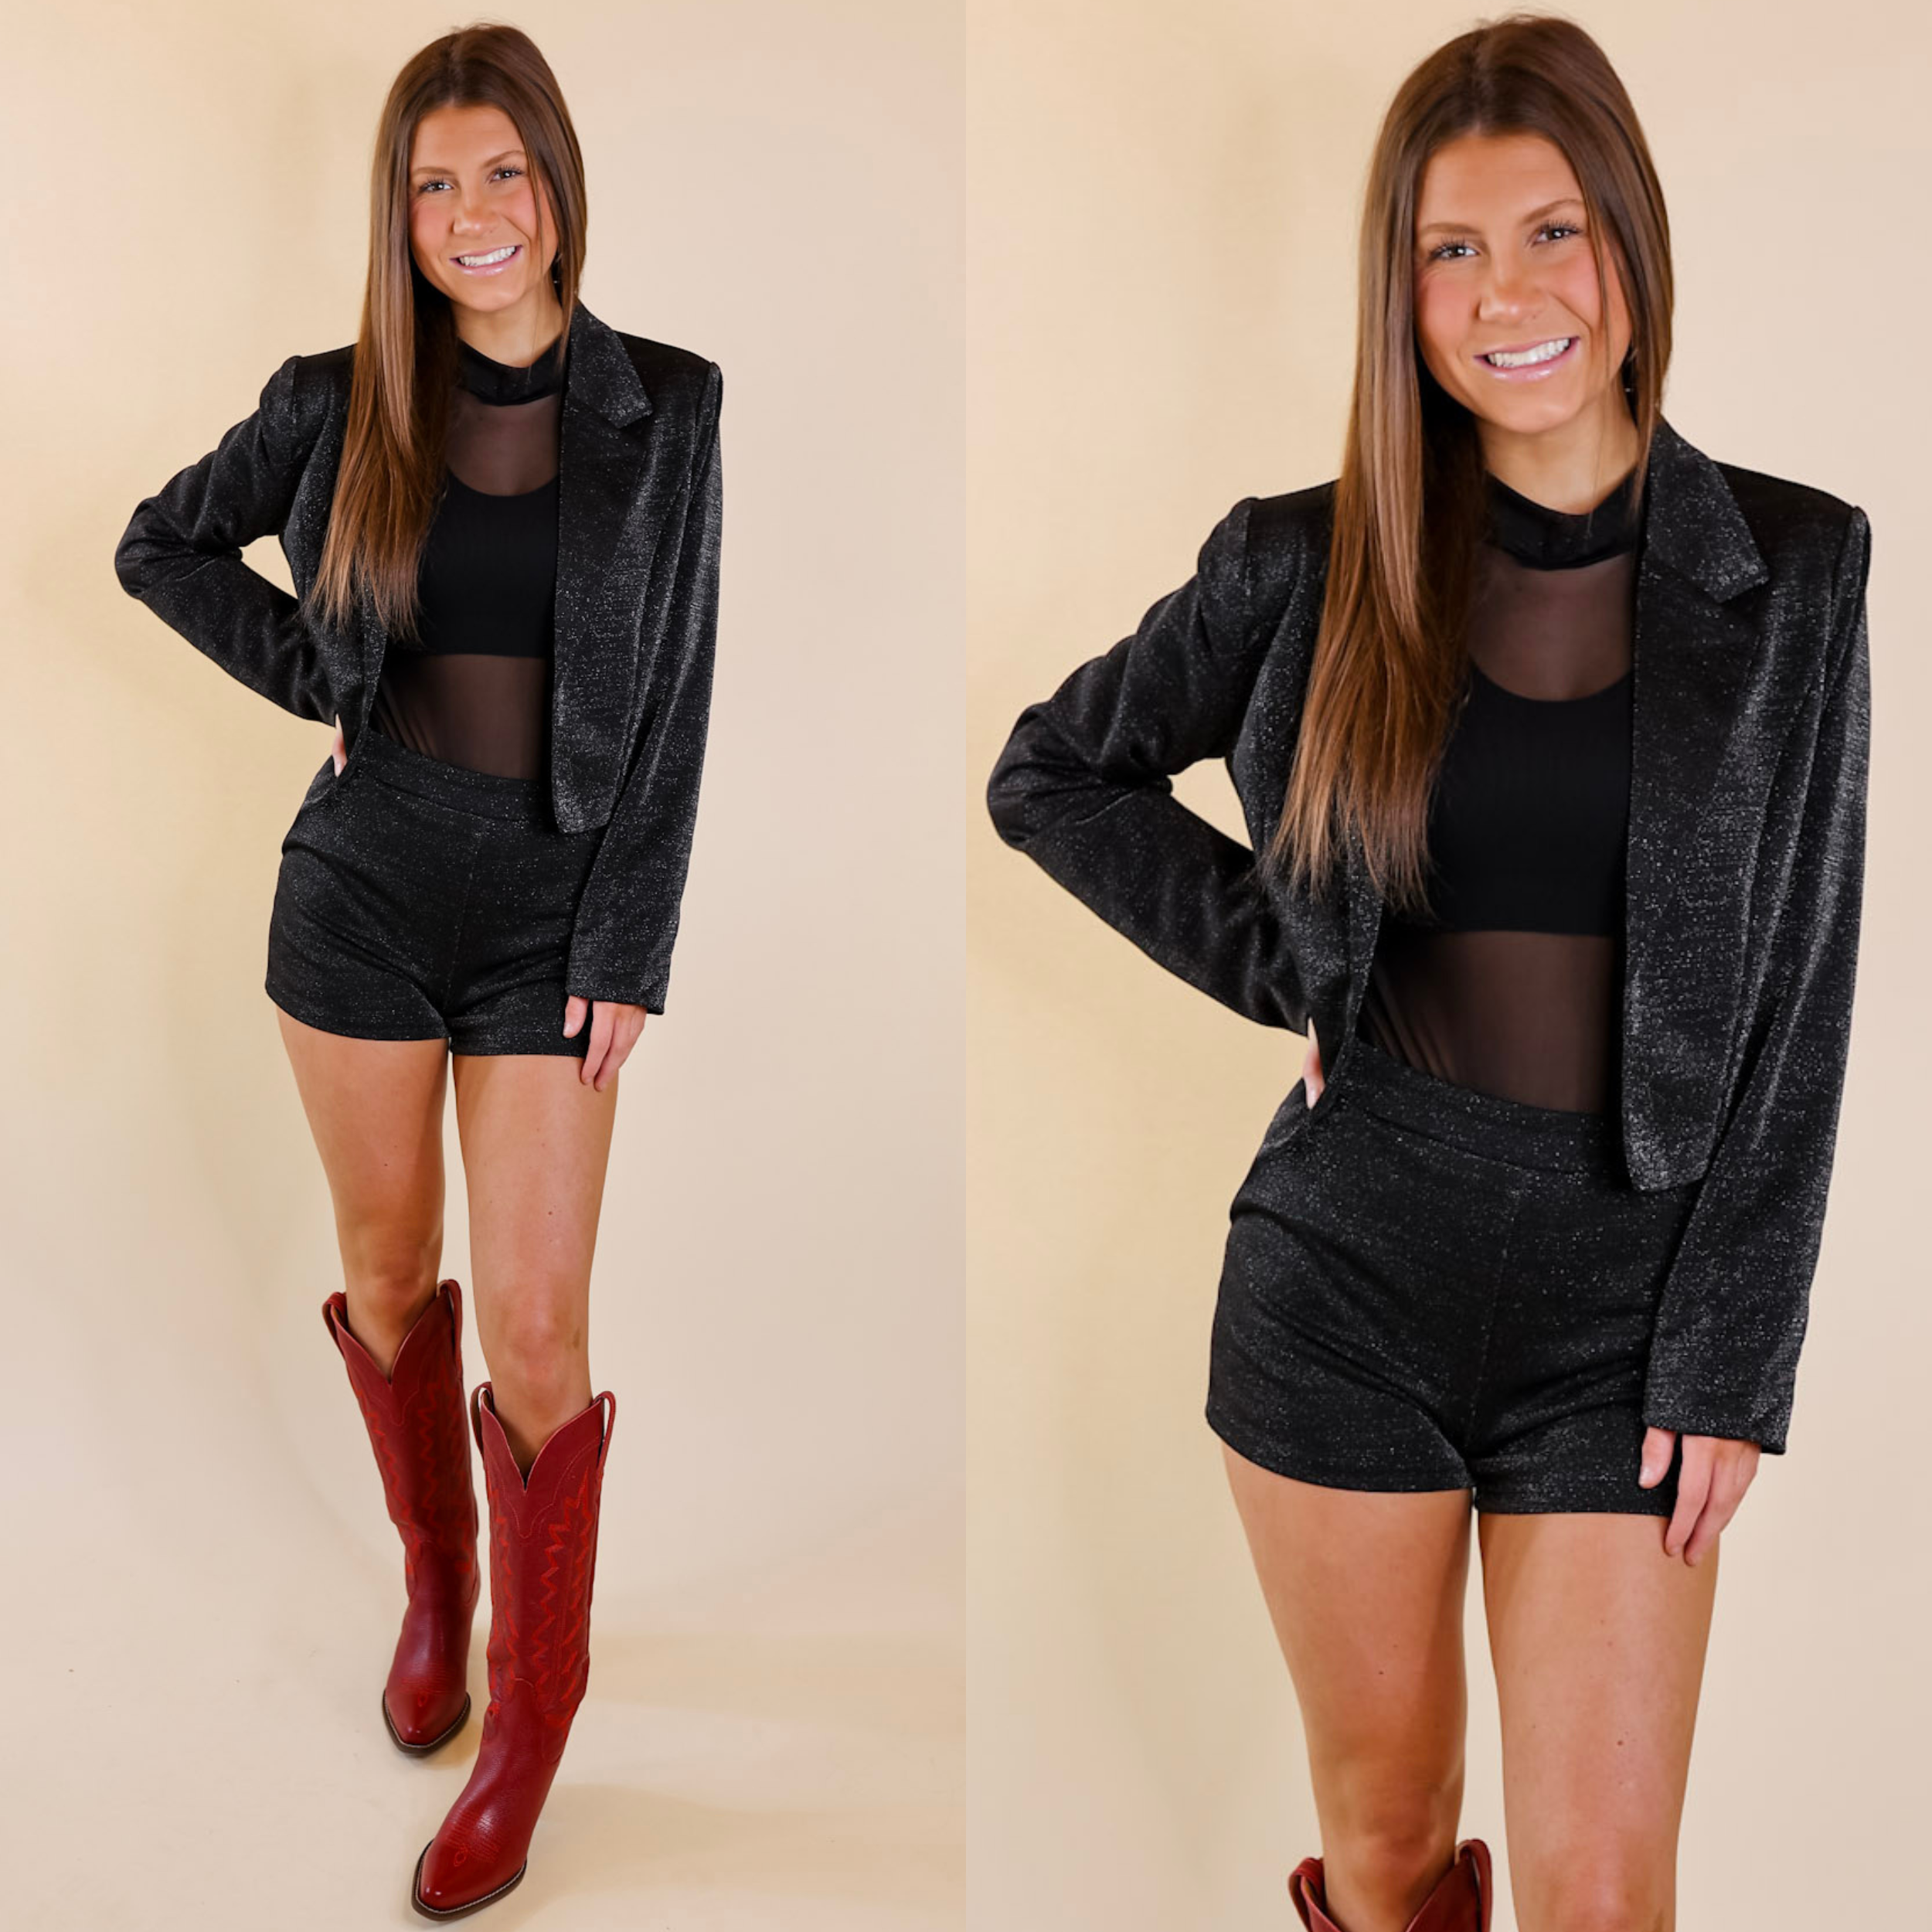 Model is wearing a black blazer with sparkle and long sleeves. Model has this paired with a black bodysuit, matching shorts, and red boots.